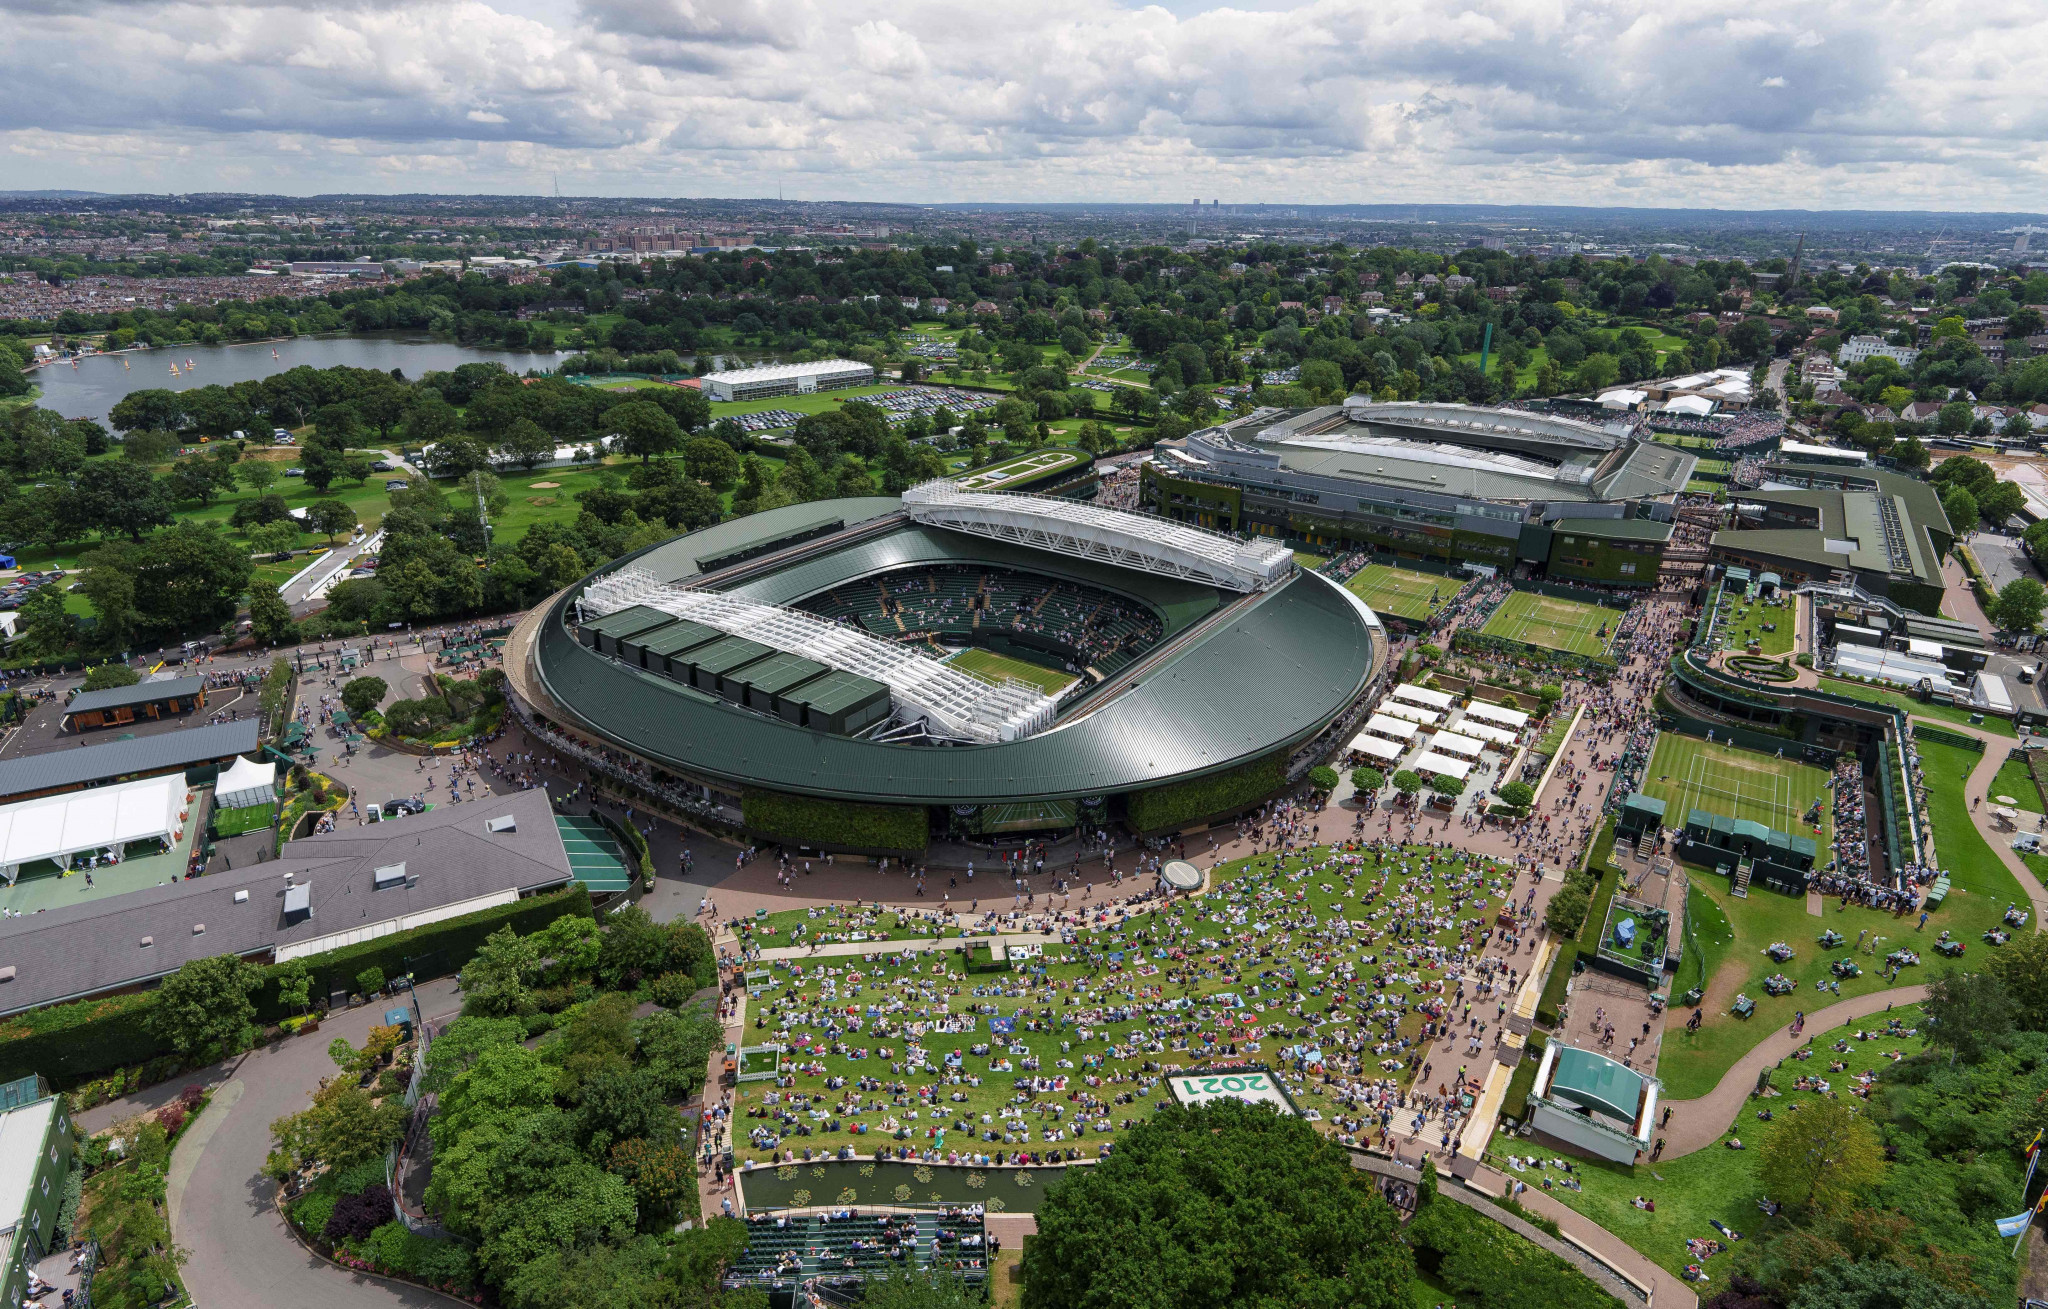 Russian and Belarusian players have been banned from Wimbledon ©Getty Images